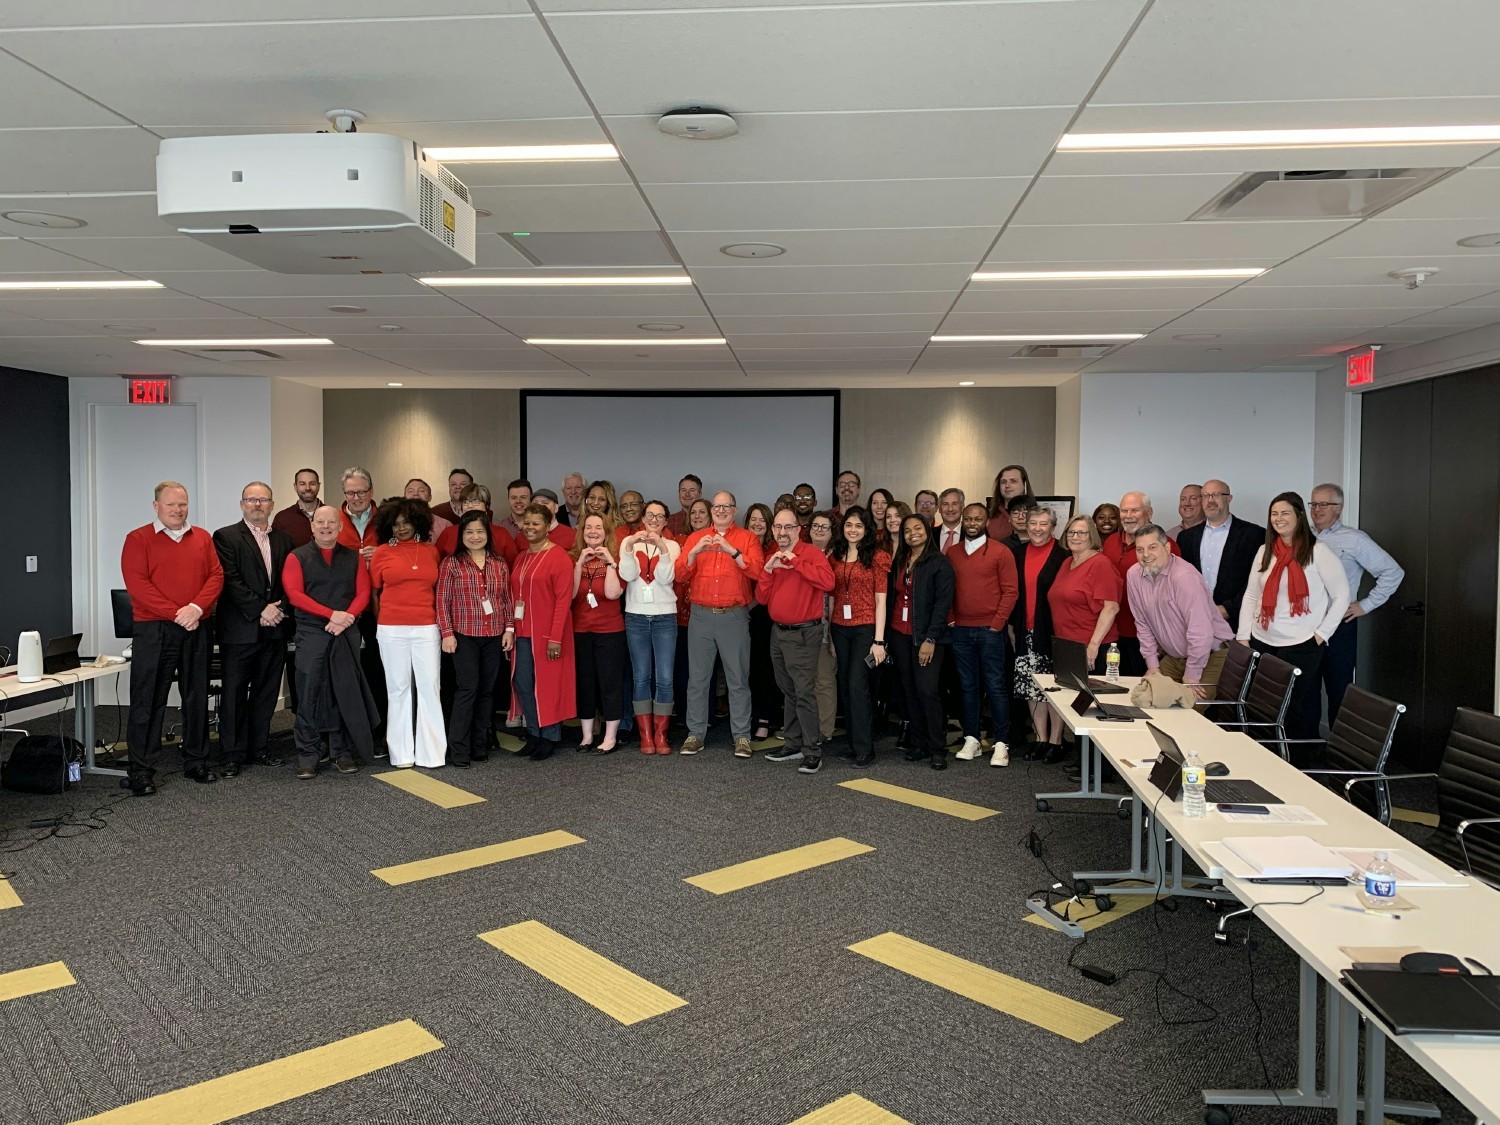 In February our Atlanta employees and Management Team wore red to raise awareness of the No. 1 killer, heart disease.  